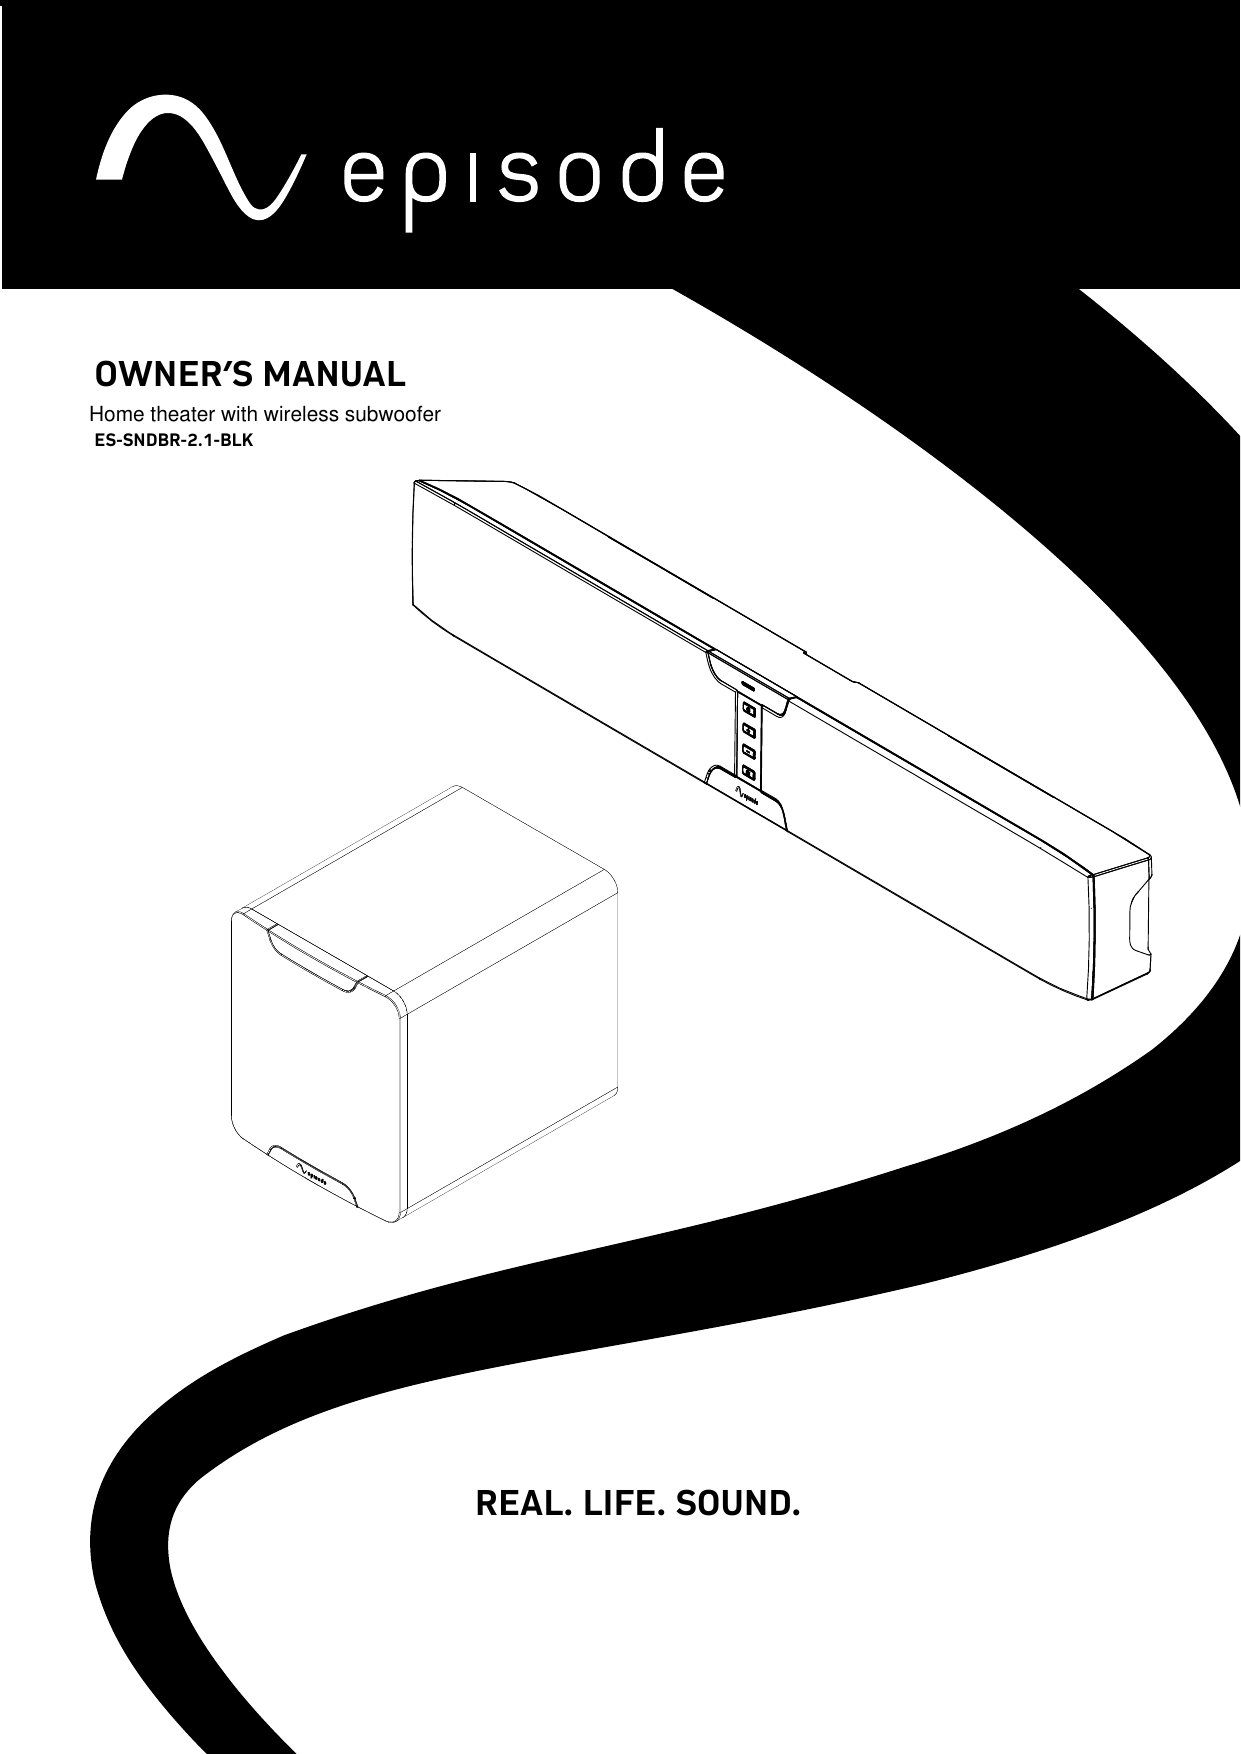 OWNER’S MANUAL ES-SNdbR-2.1-bLKREAL. LIFE. SOUND.Home theater with wireless subwoofer